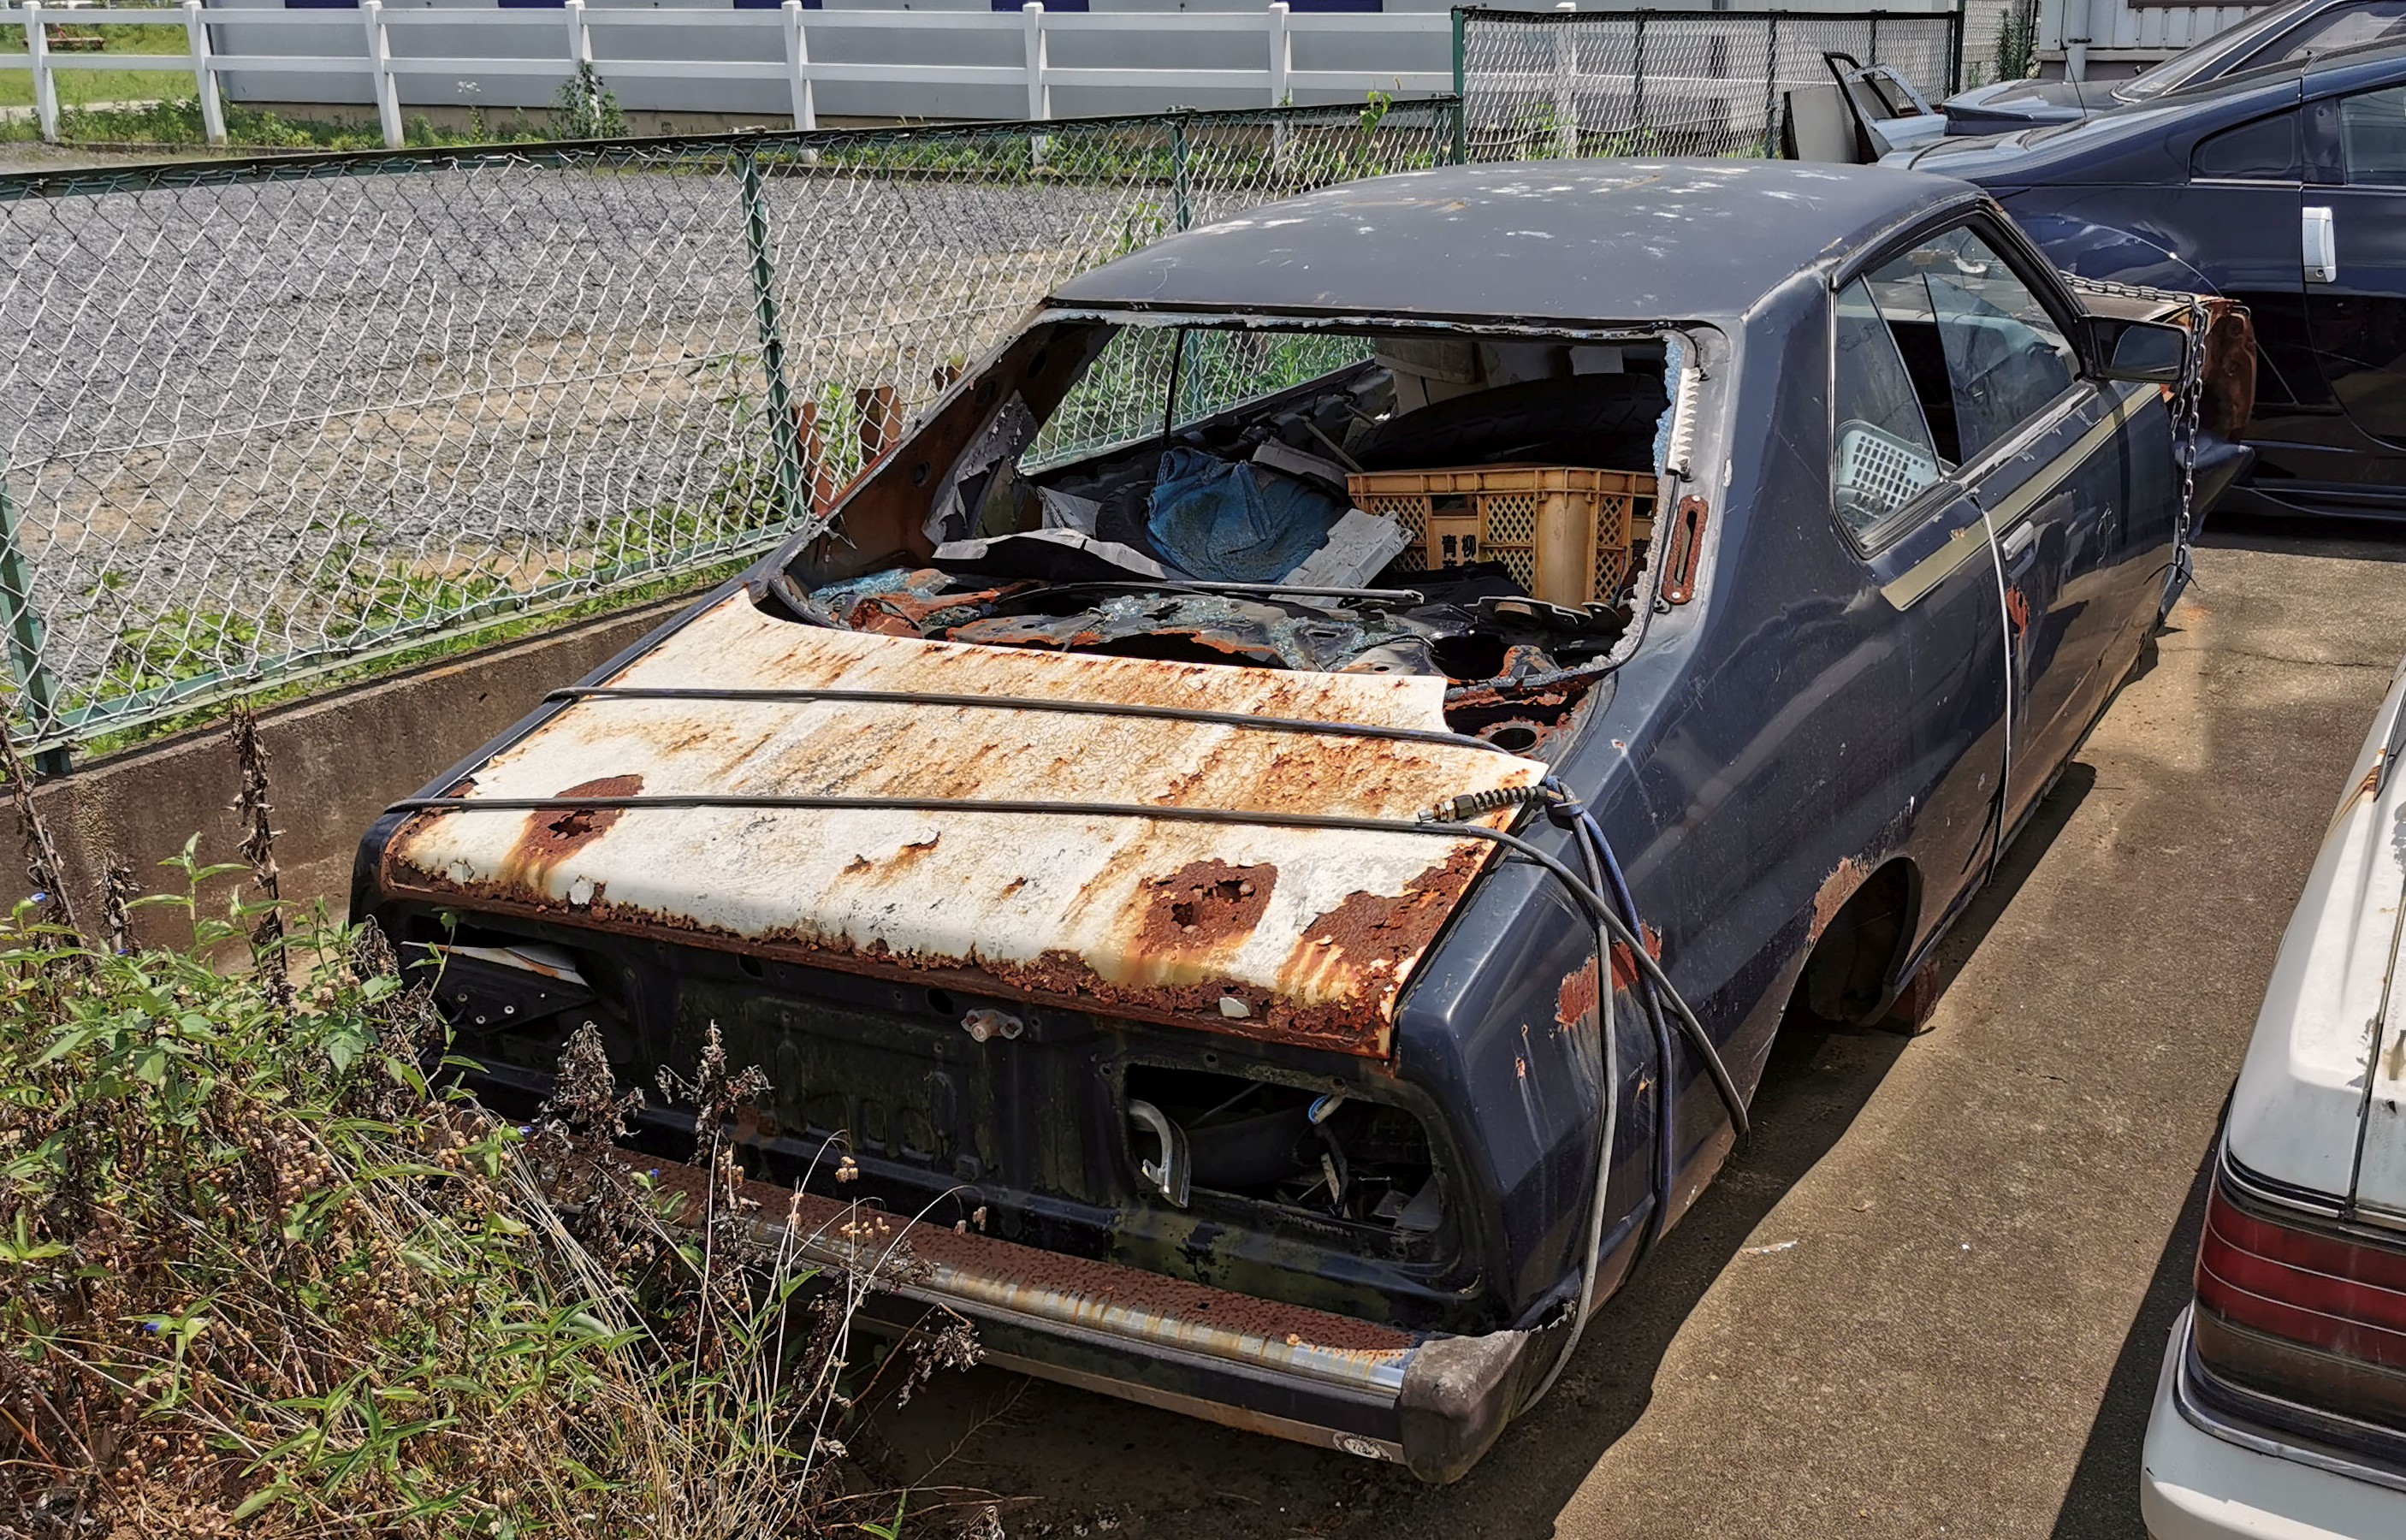 Will this Nissan Skyline “Japan” Ever See the Roads Again?